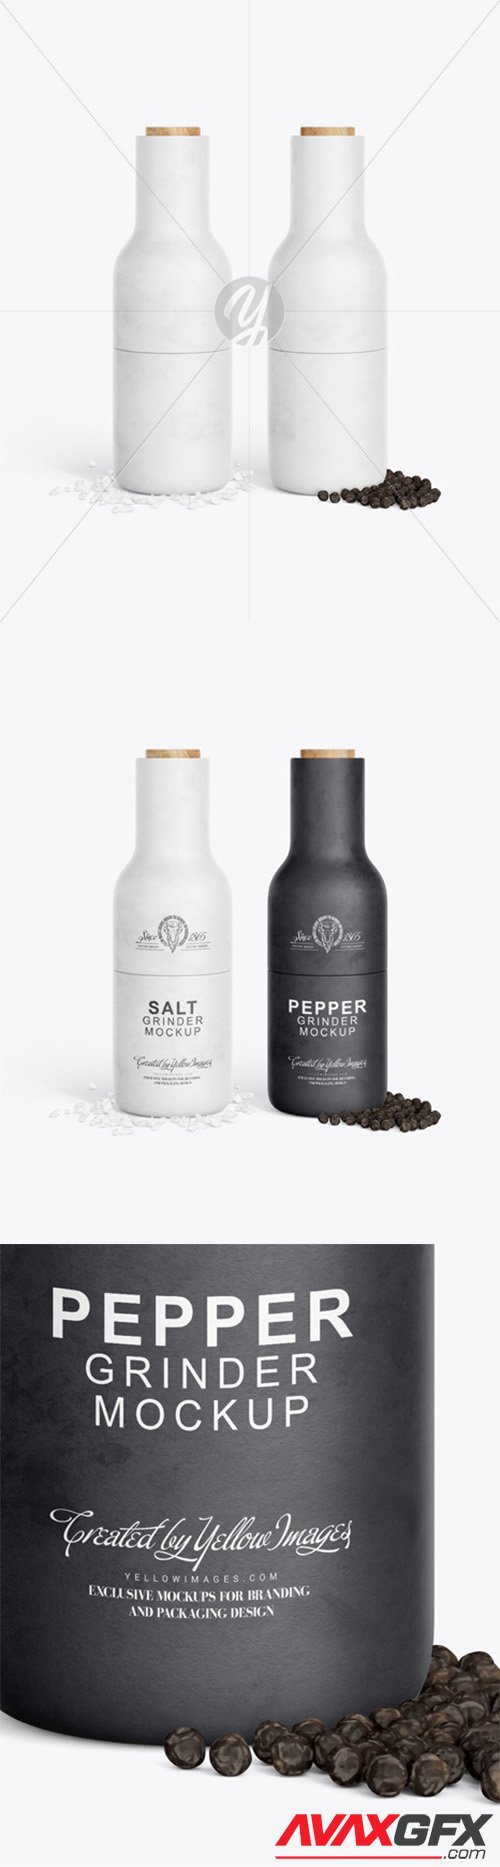 Two Grinders with Salt & Pepper Mockup 62427